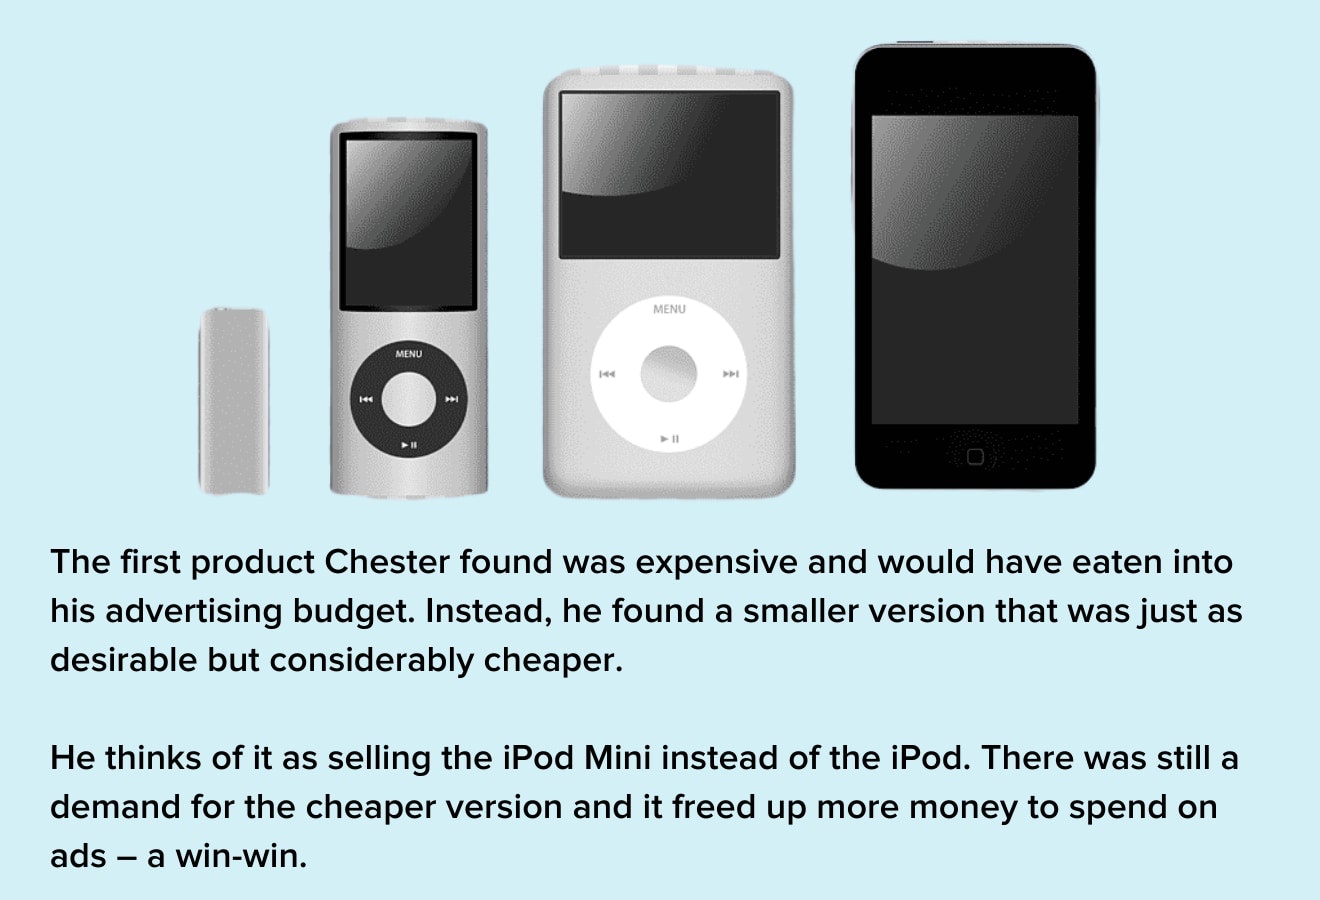 Chester explains his product as the 'iPod Mini' rather than the more premium 'iPod'